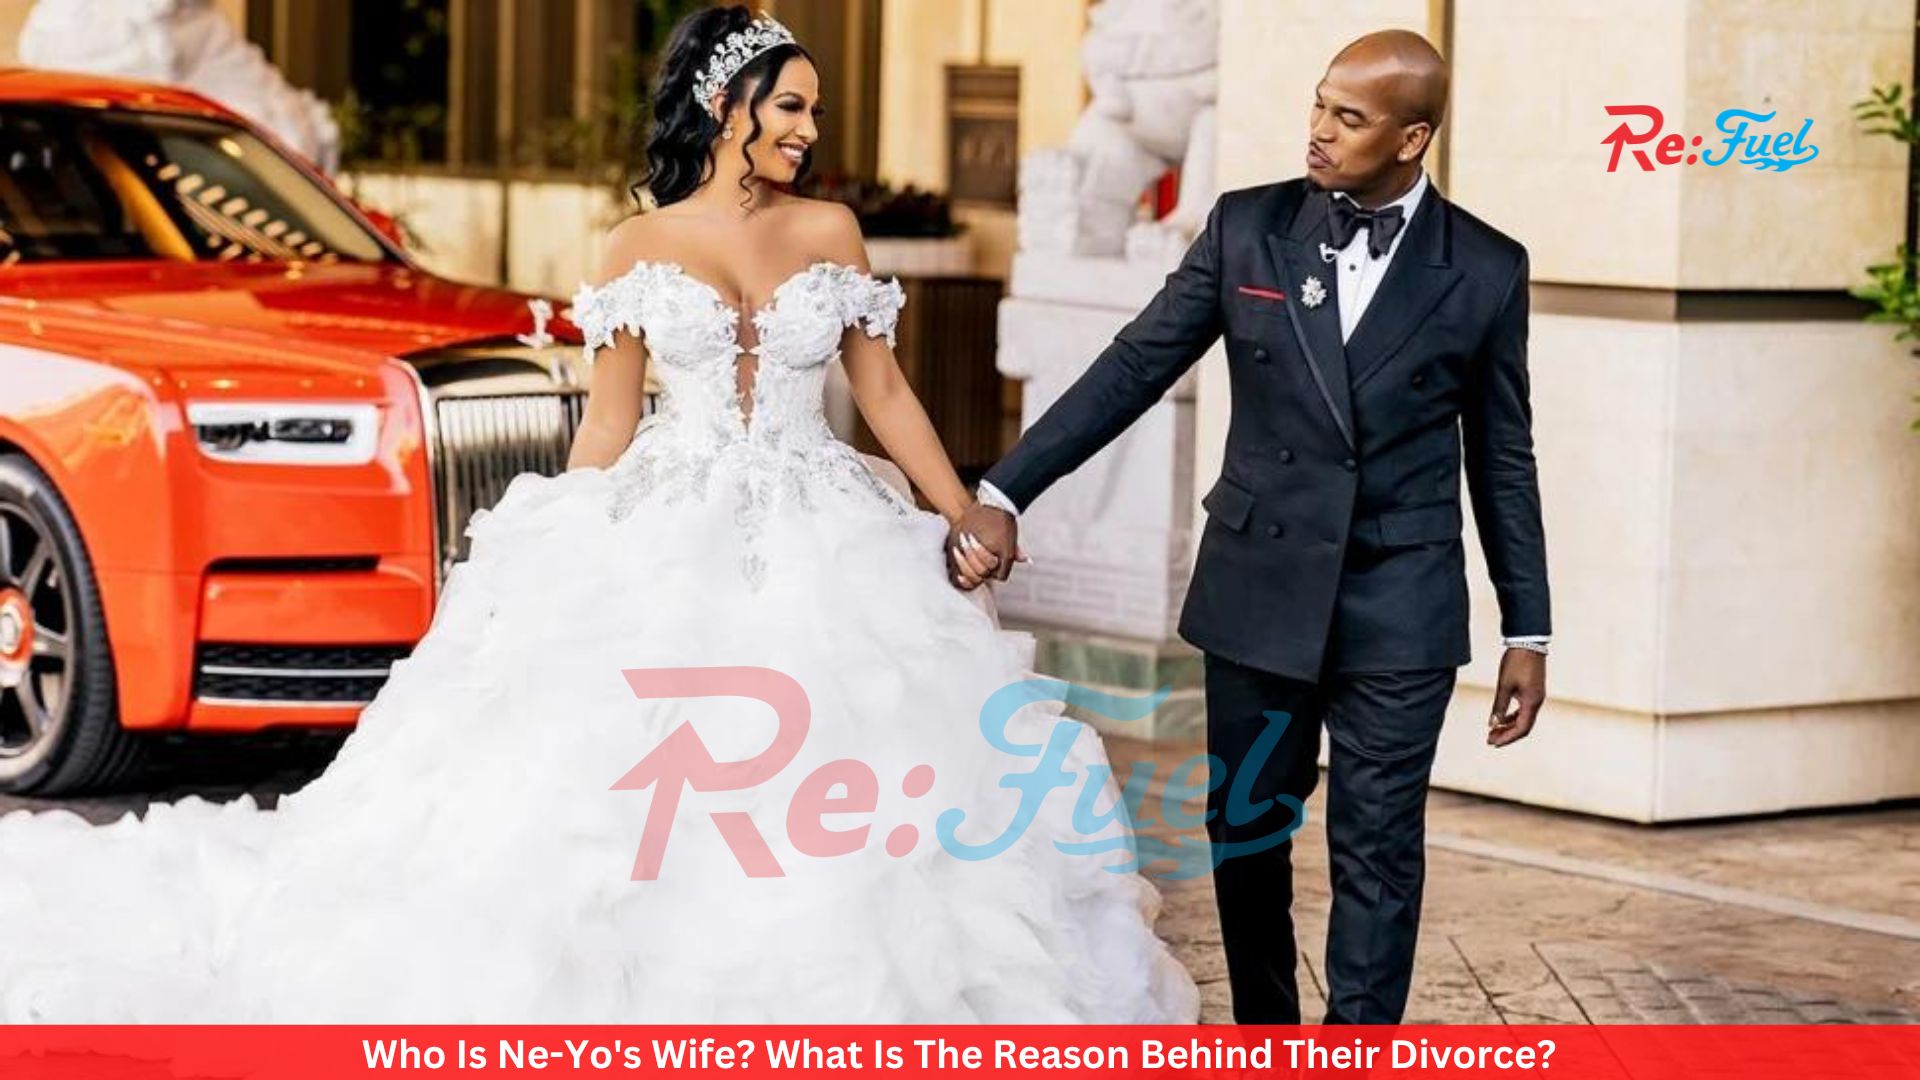 Who Is Ne-Yo's Wife? What Is The Reason Behind Their Divorce?